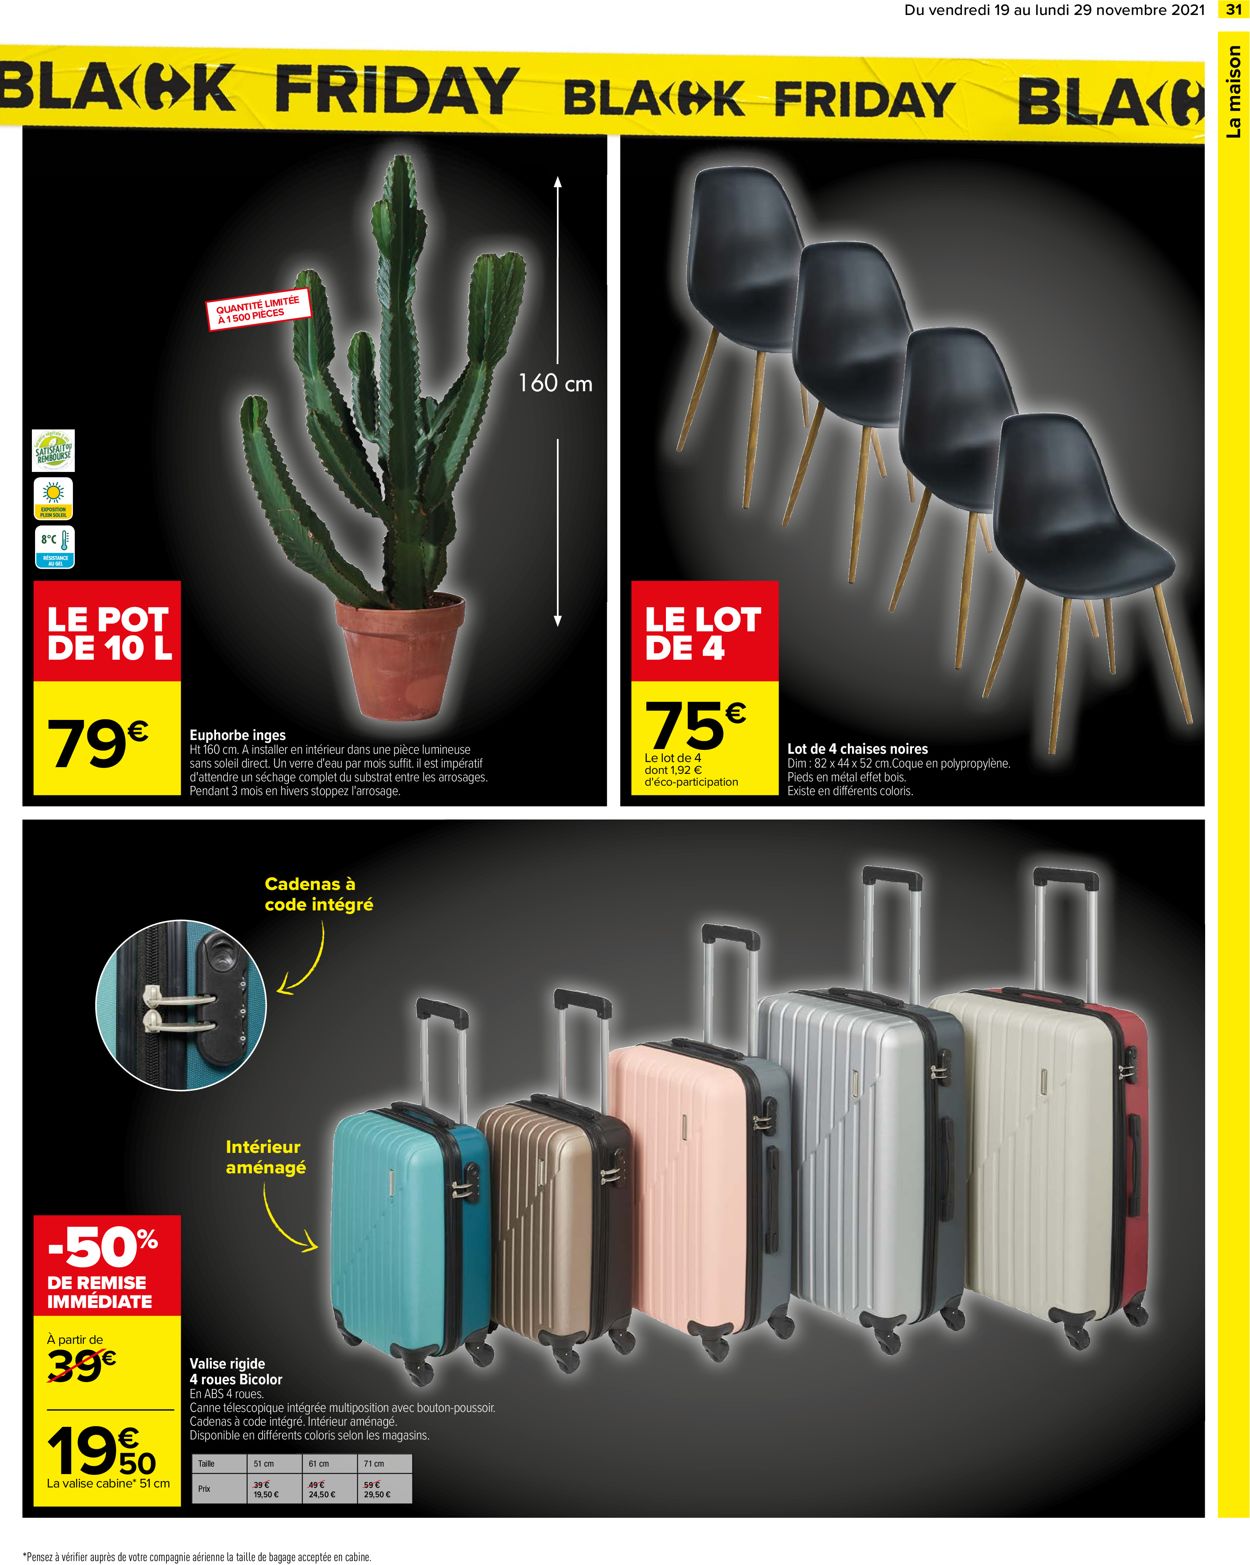 Carrefour BLACK WEEK 2021 Catalogue - 19.11-29.11.2021 (Page 31)